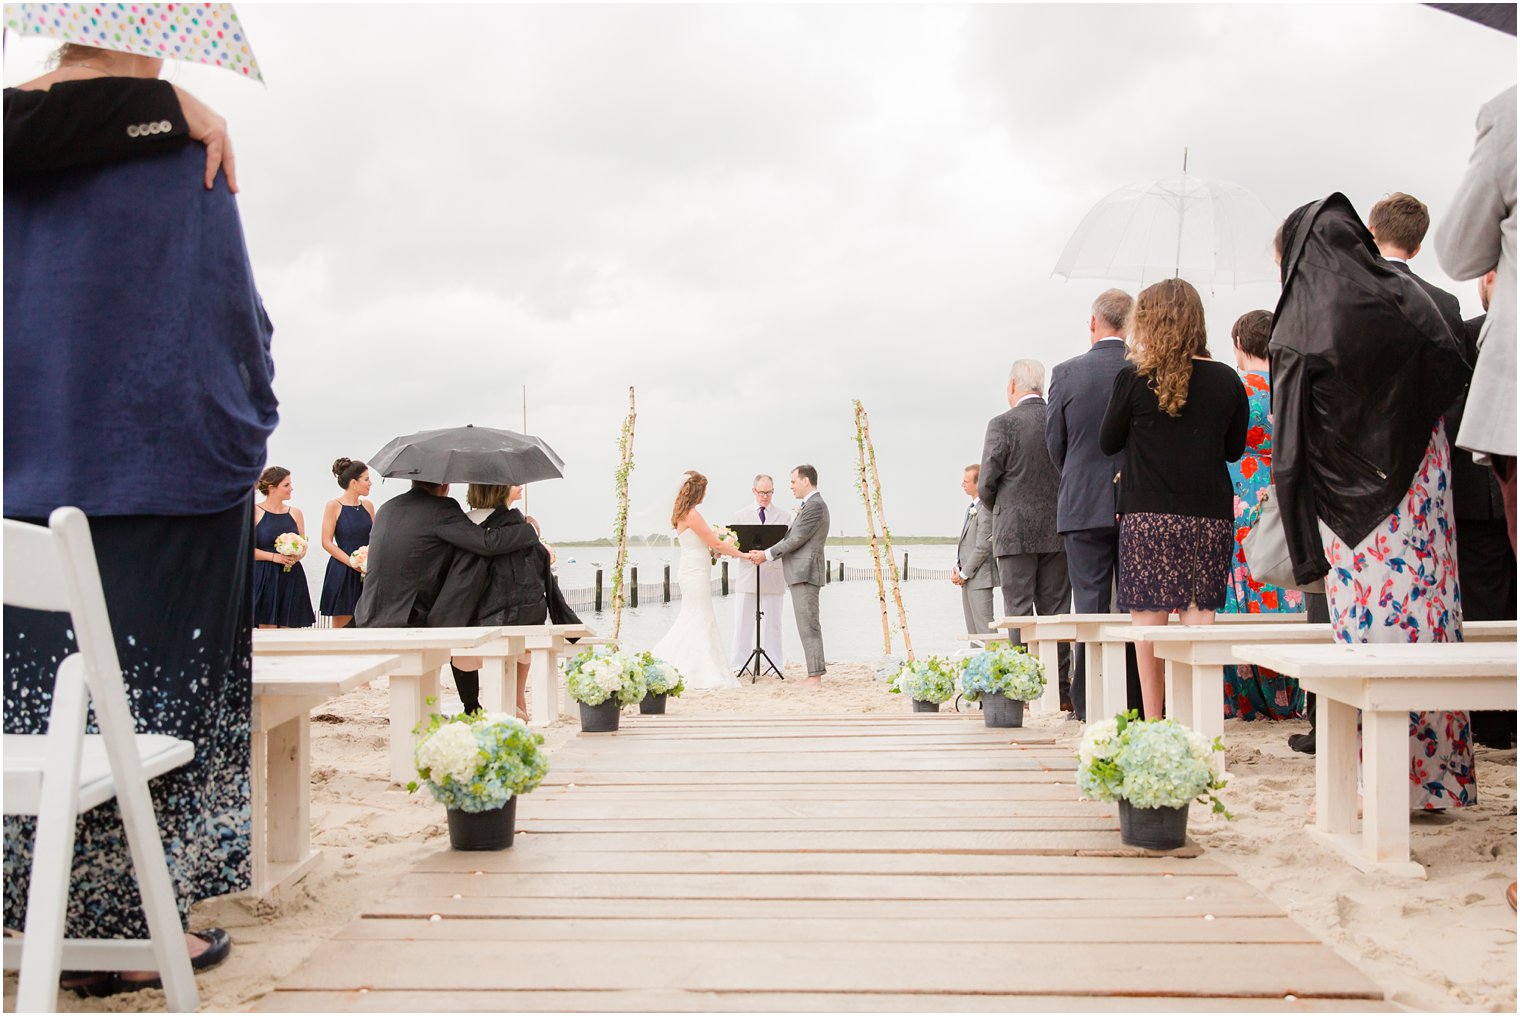 oceanfront beach wedding photographed by Brant Beach Yacht Club wedding photographer Idalia Photography